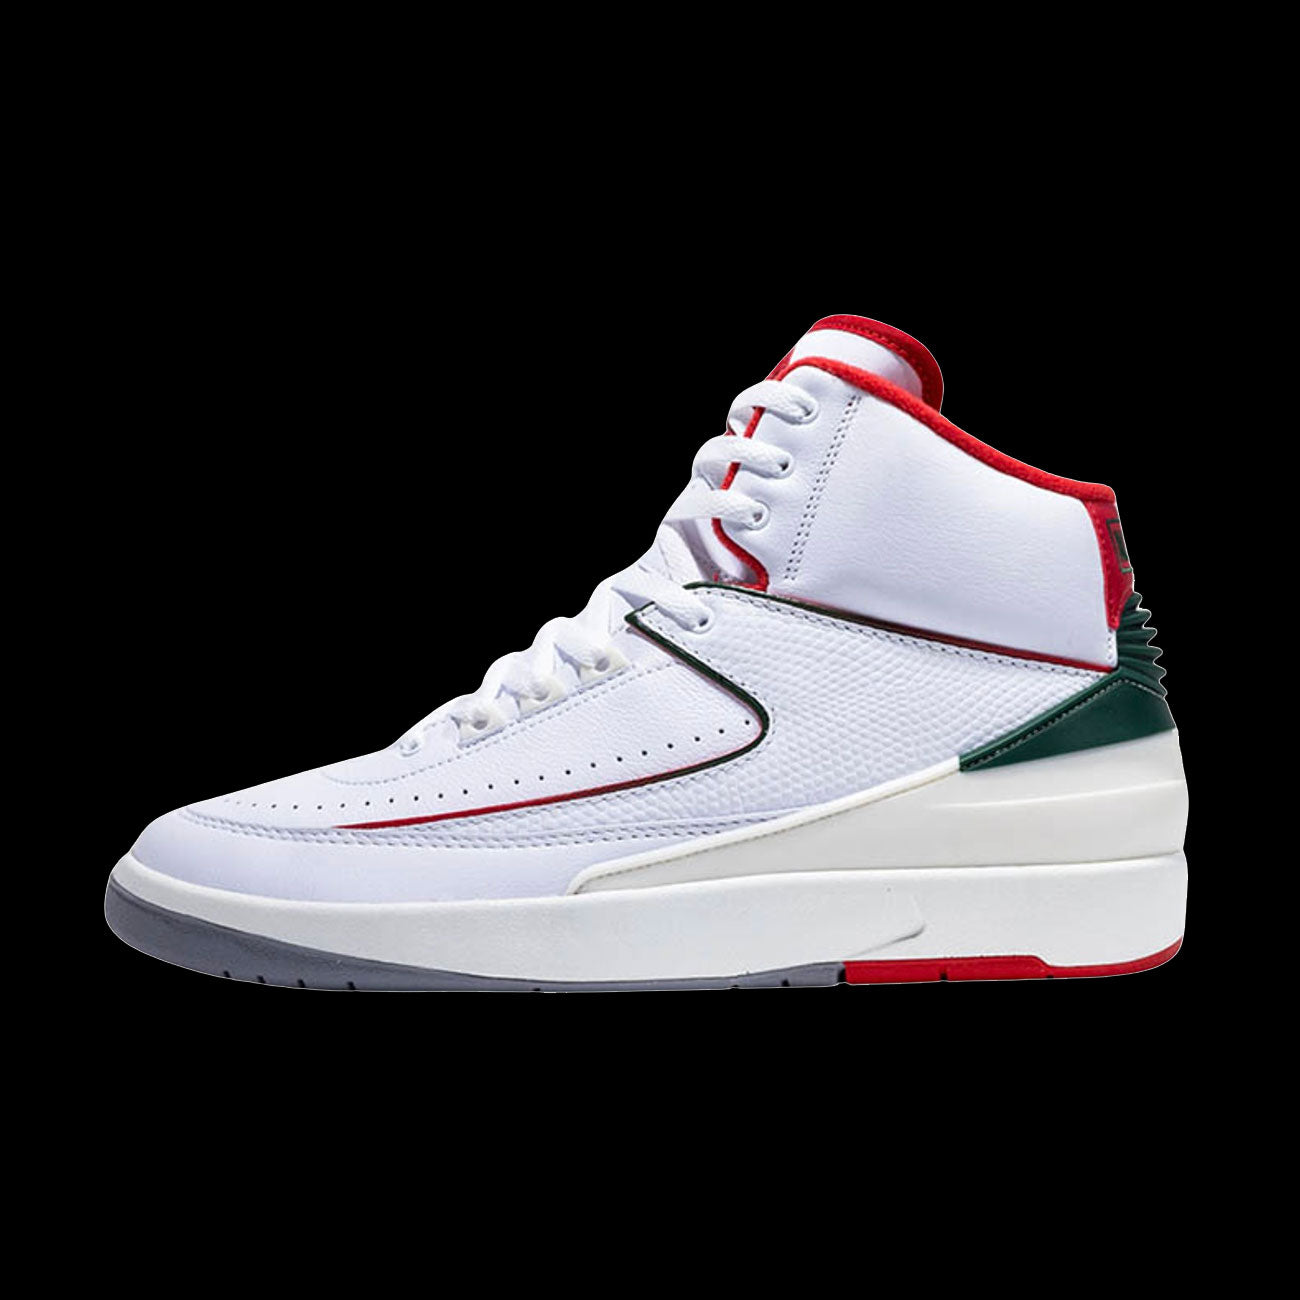 ADM x Feiyue Joint Men‘s/Women’s Casual Canvas Shoes - White/Red/Green